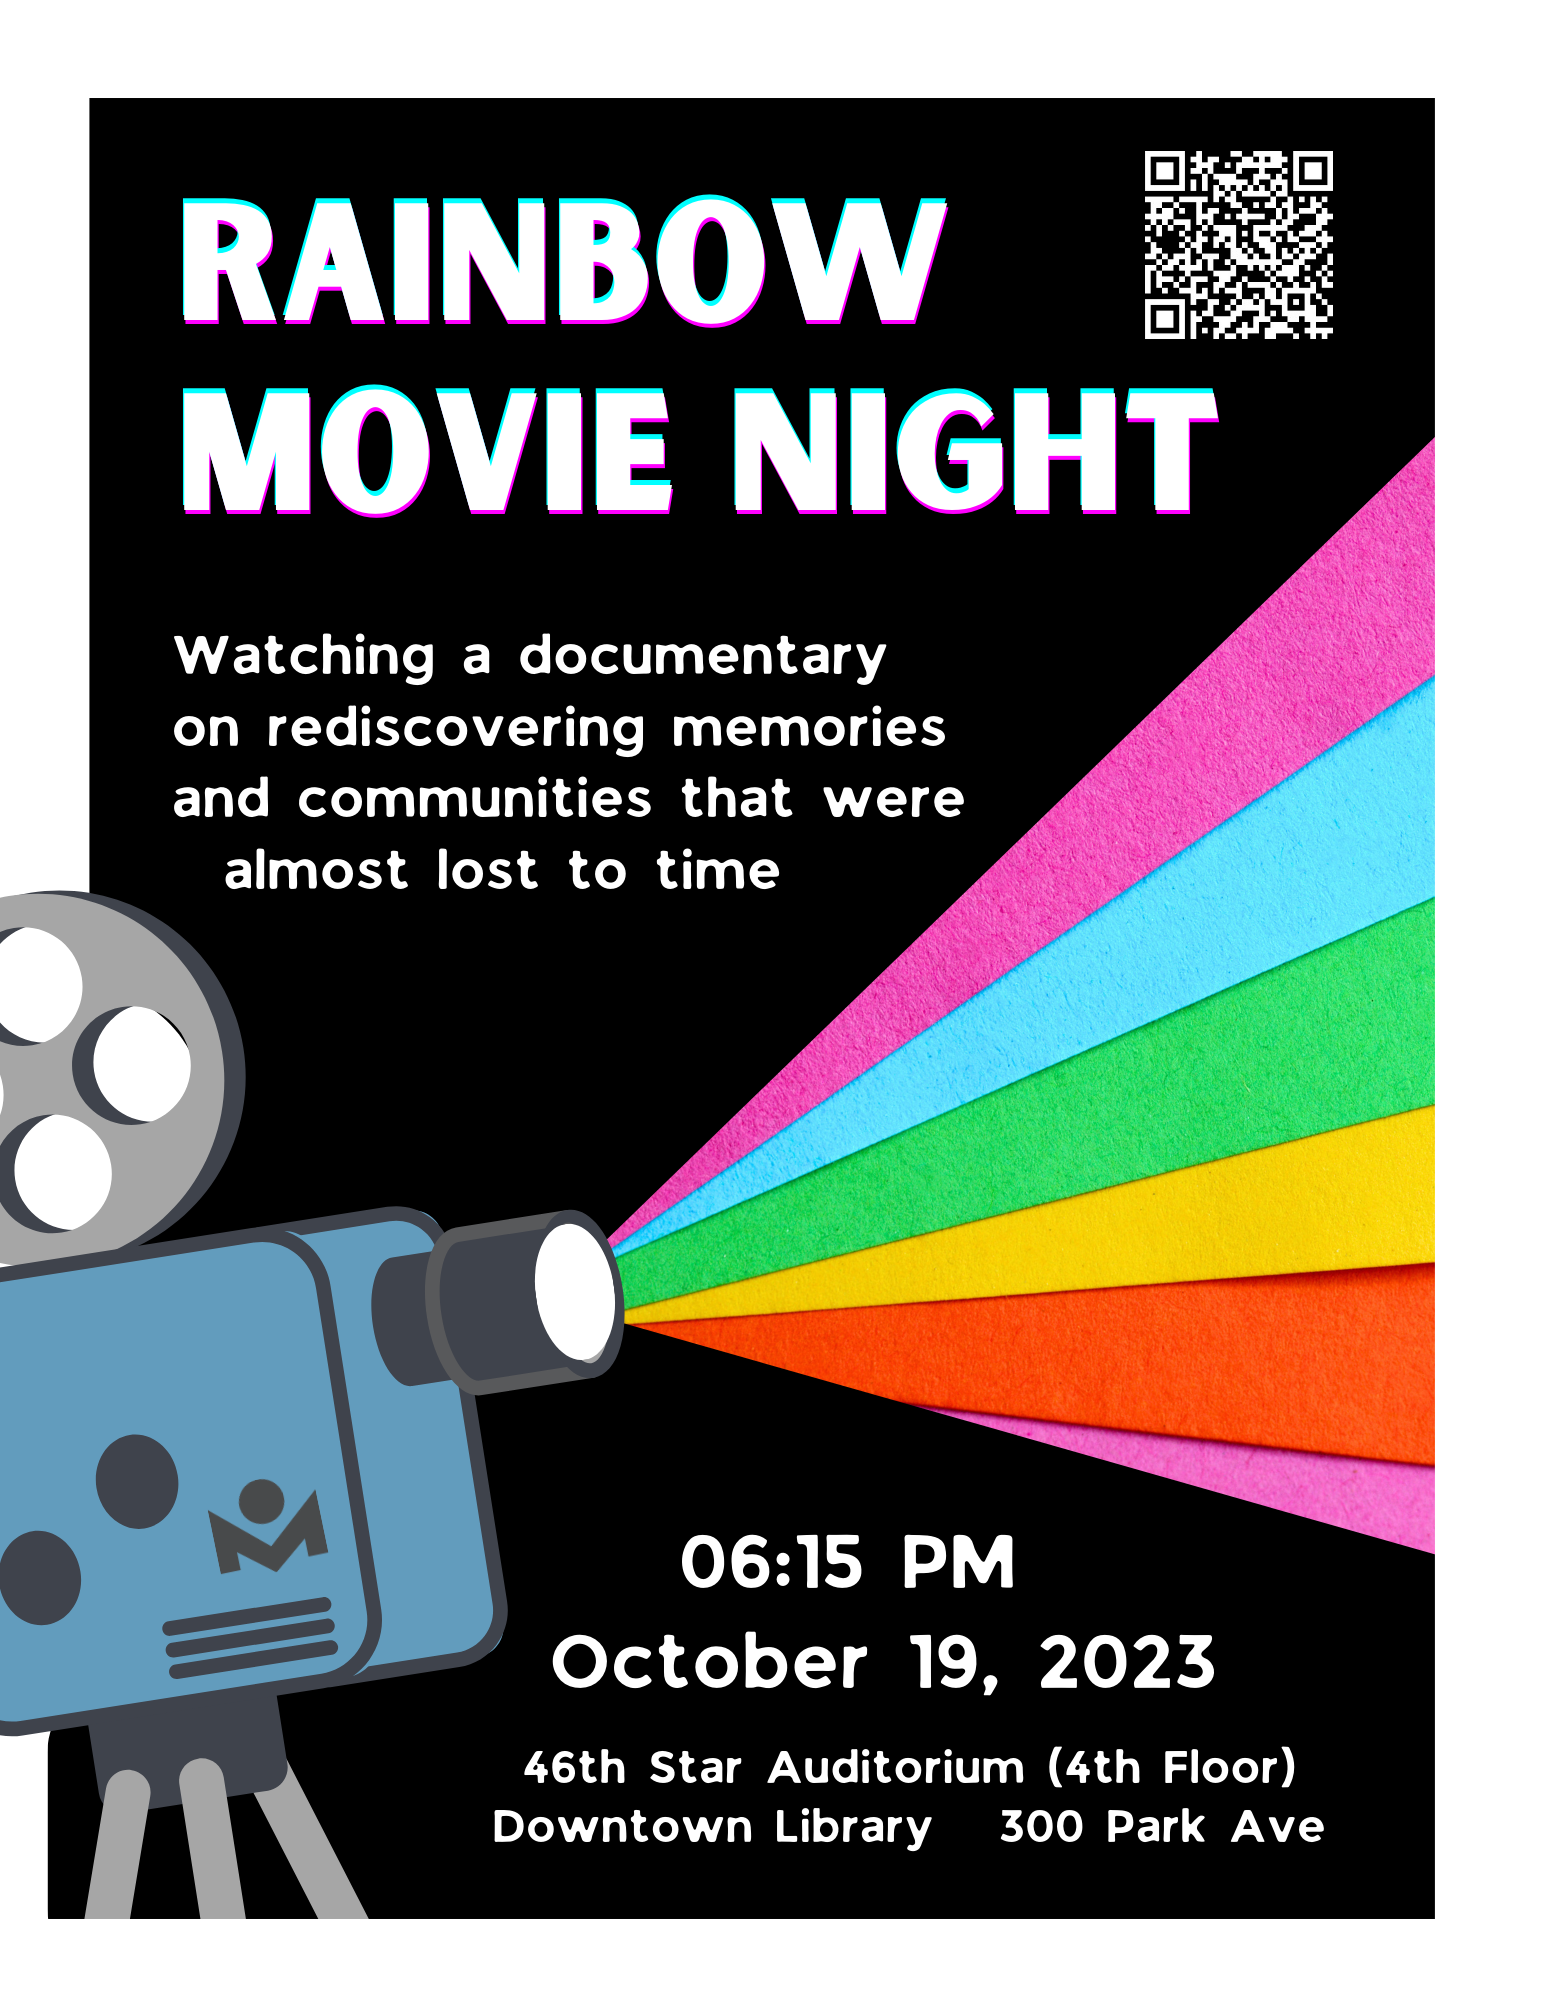 A black background featuring a drawing of a film projector with a rainbow beam of light streaming out of it, with white text about the Rainbow Movie Night event at the Downtown Library branch at 6:15 on October 19th, 2023.